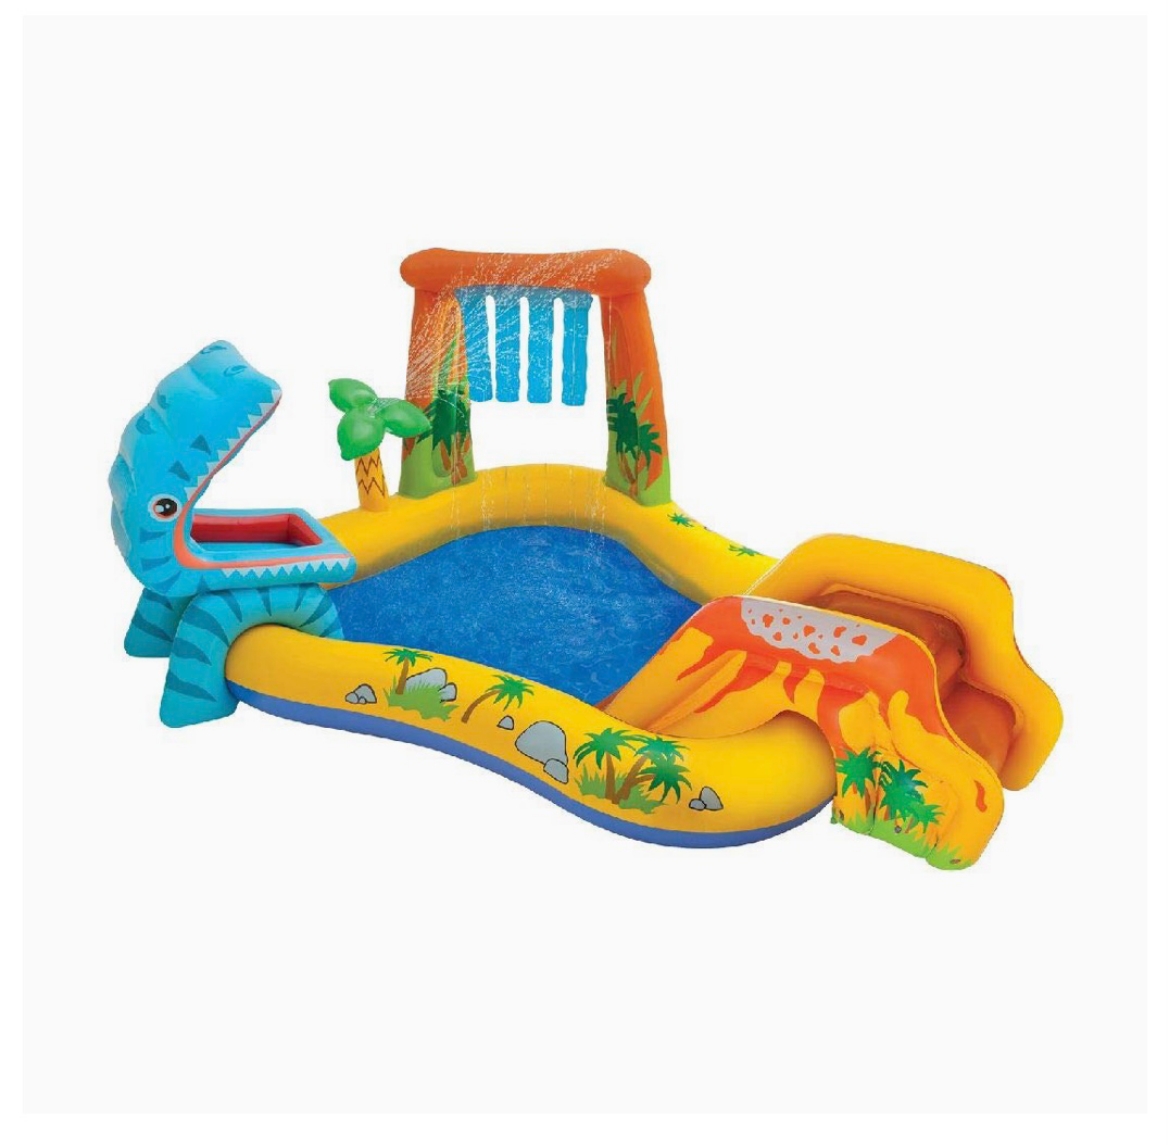 Picture of PLAY CENTER POOL